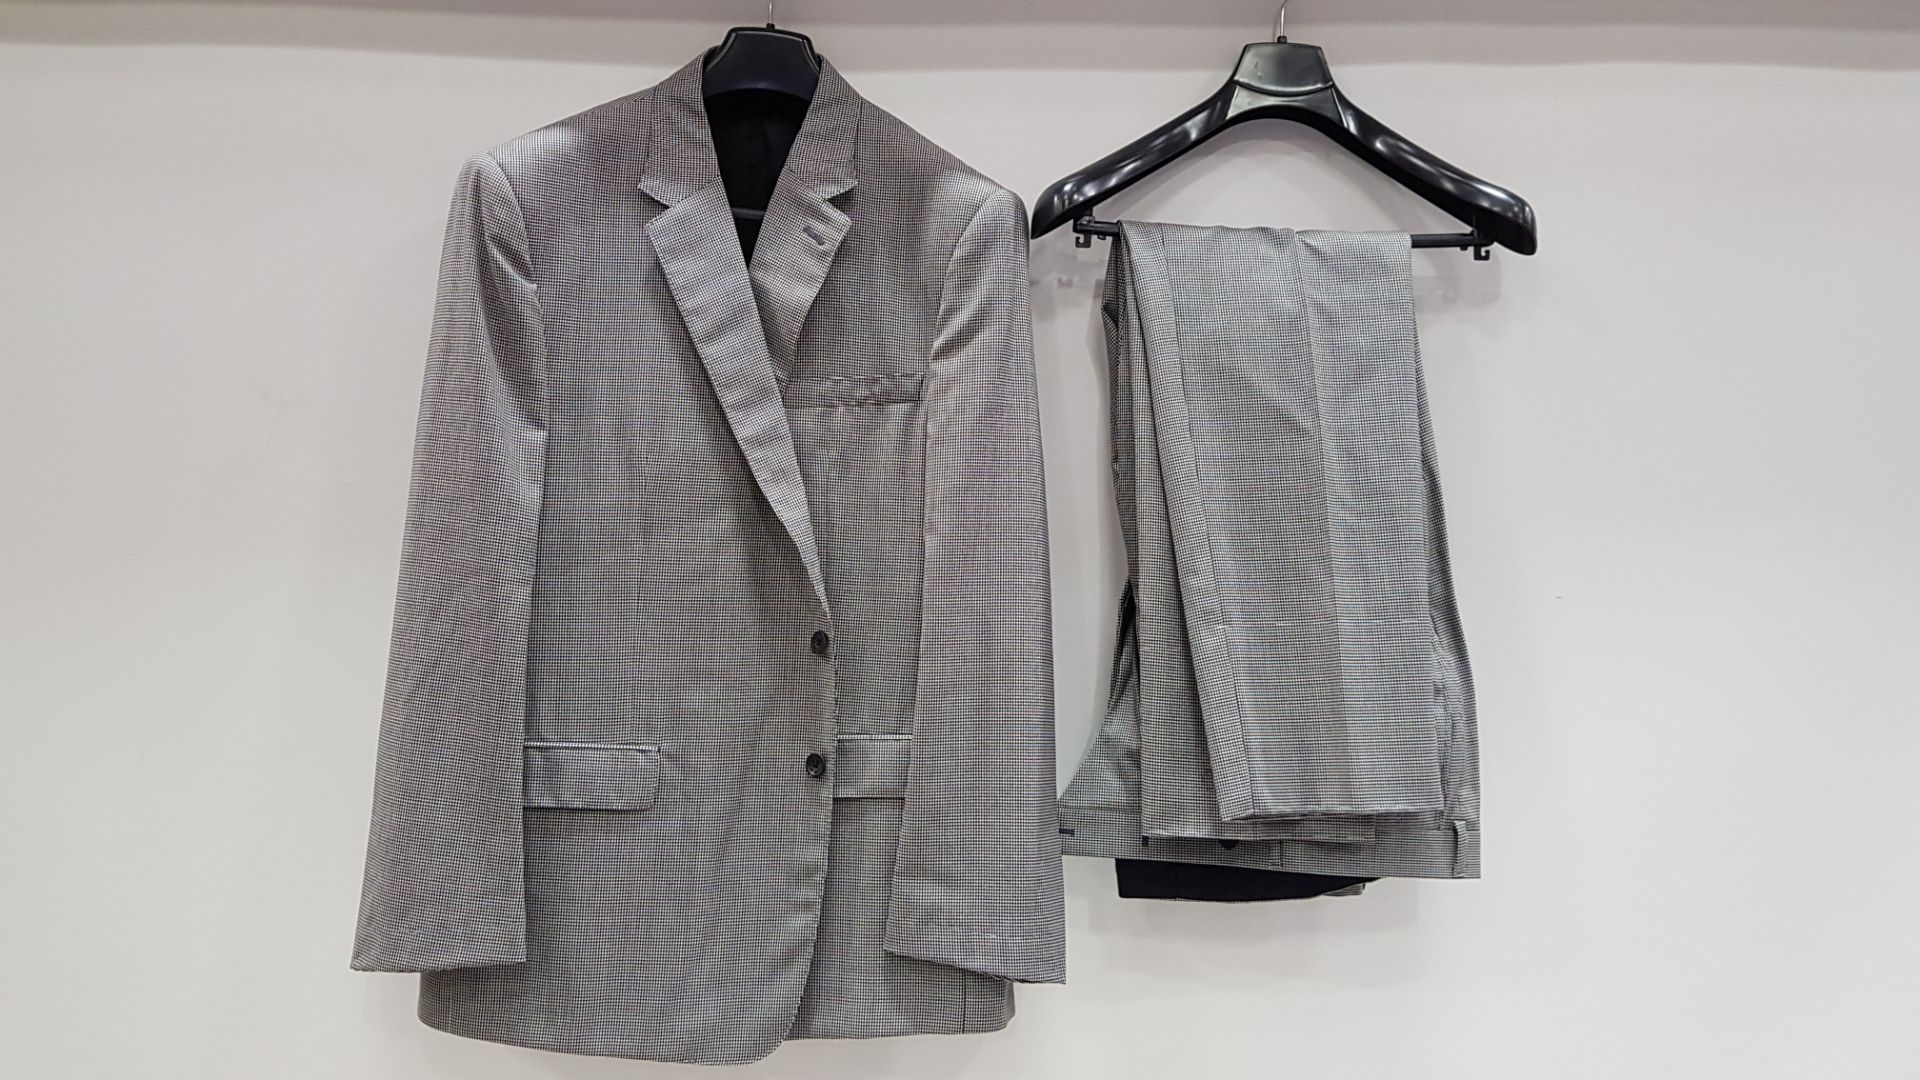 3 X BRAND NEW LUTWYCHE HAND TAILORED LIGHT GREY PATTERNED SUITS SIZE 42L AND 48R (PLEASE NOTE